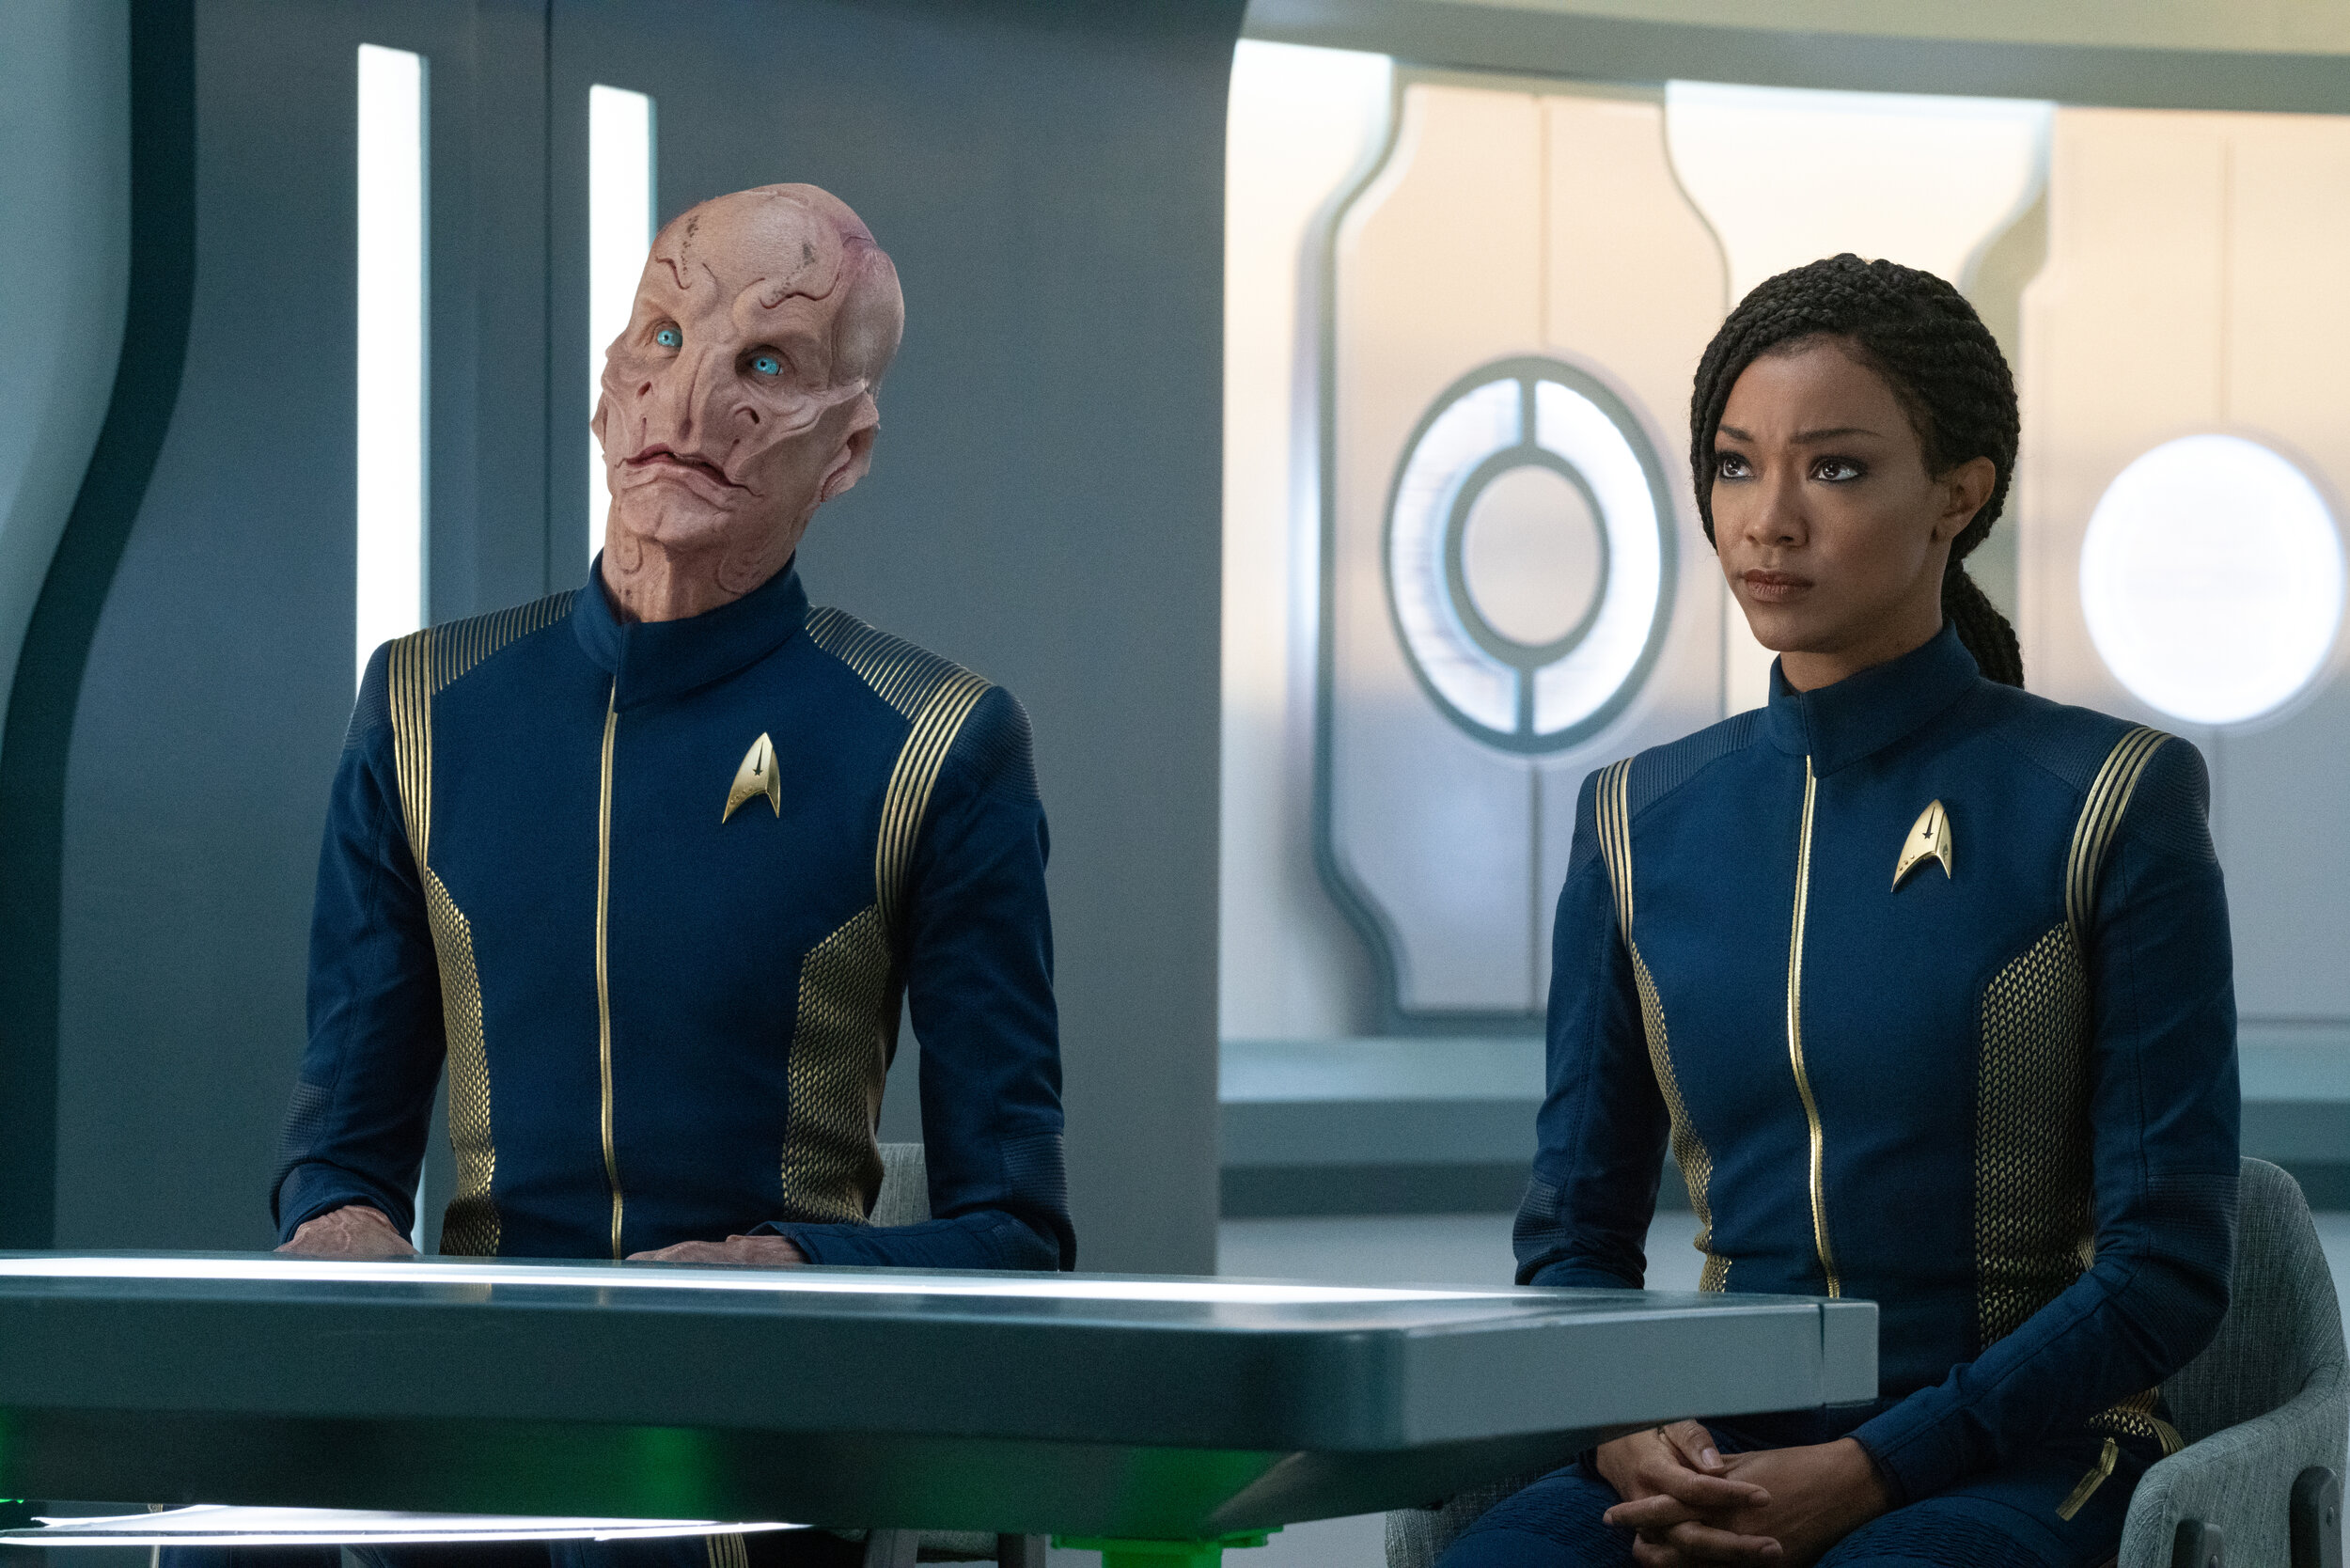   "Die Trying" -- Ep#305 -- Pictured: Doug Jones as Saru and Sonequa Martin-Green as Burnham of the CBS All Access series STAR TREK: DISCOVERY. Photo Cr: Michael Gibson/CBS ©2020 CBS Interactive, Inc. All Rights Reserved.  